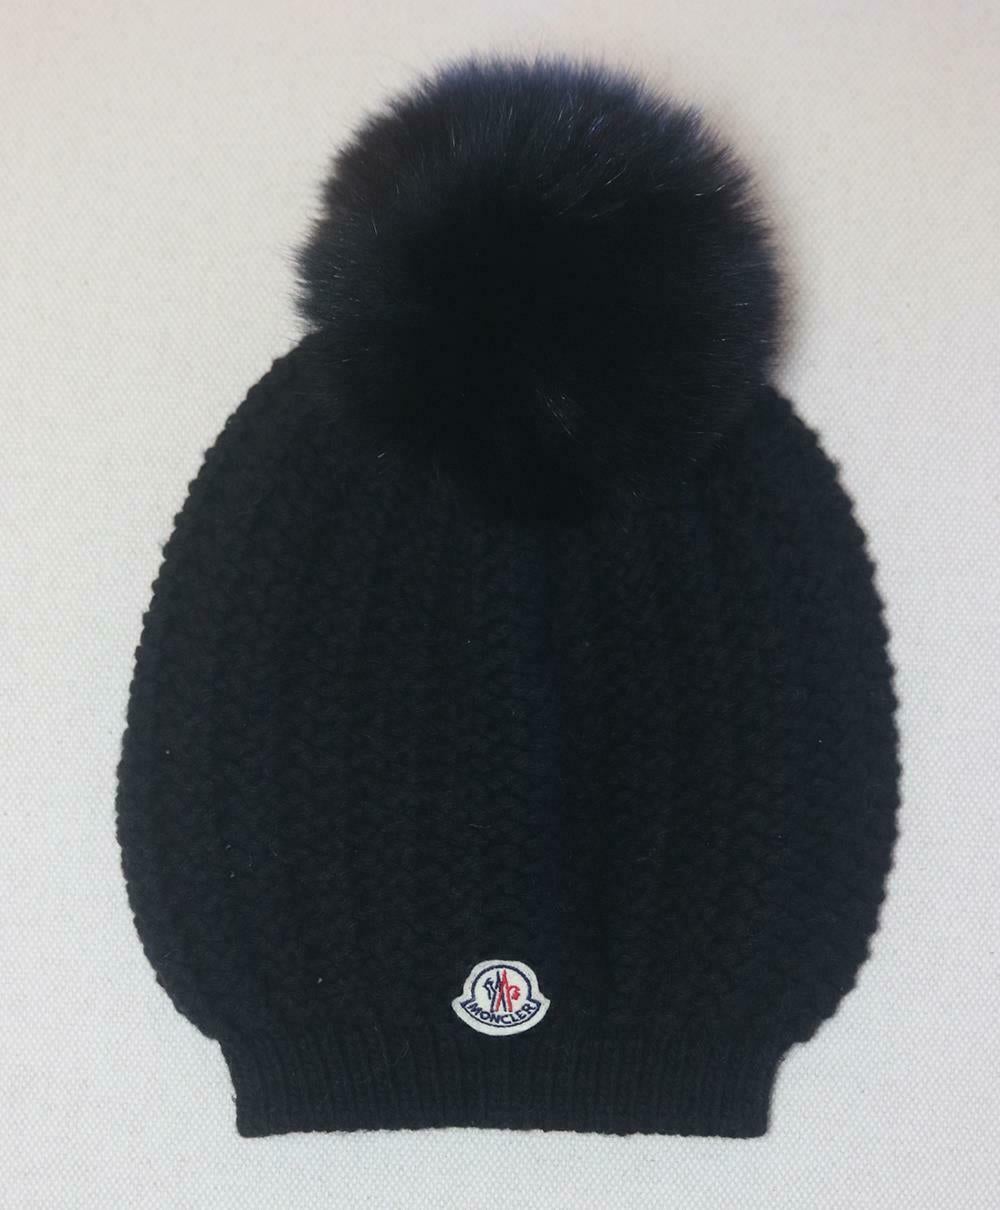 Moncler's black knitted hat features the label's logo on the trim, it's made from wool-blend in a reassuring chunky knit and finished with a matching fox fur pom pom, so you'll stay warm no matter how cold it gets.
Black wool-blend, black fox